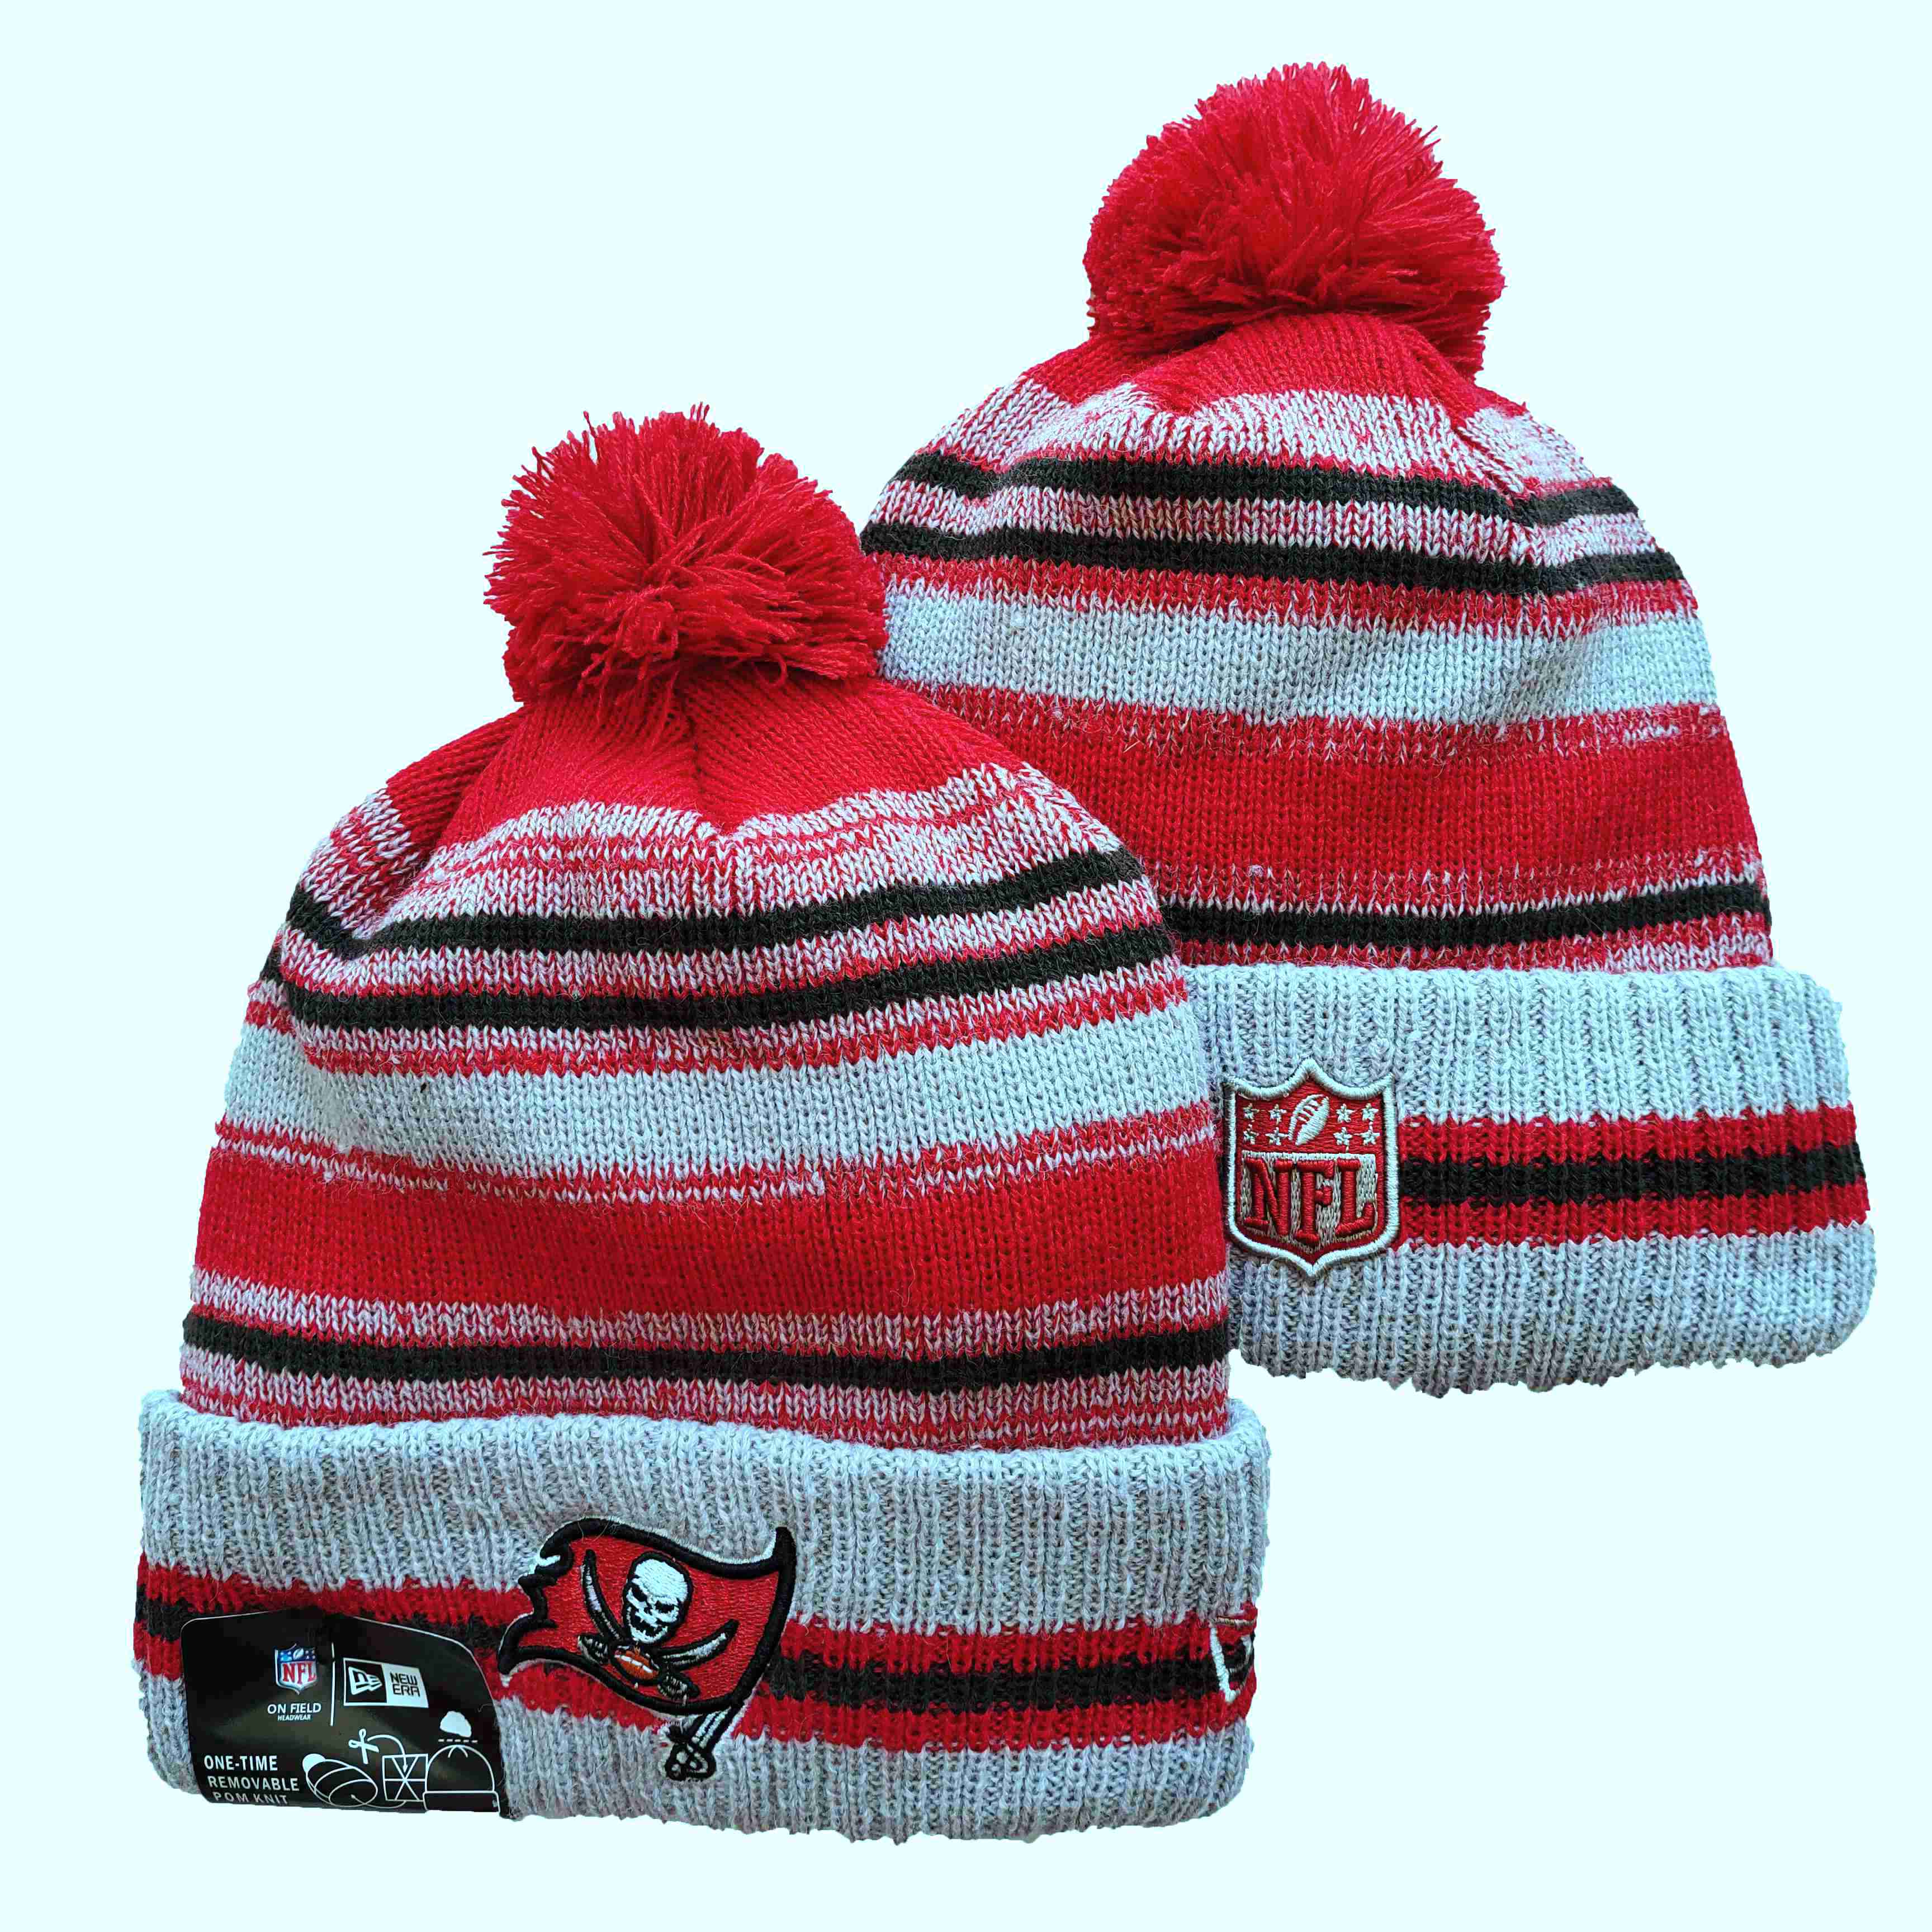 NFL Tampa Bay Buccaneers Beanies Knit Hats-YD1287